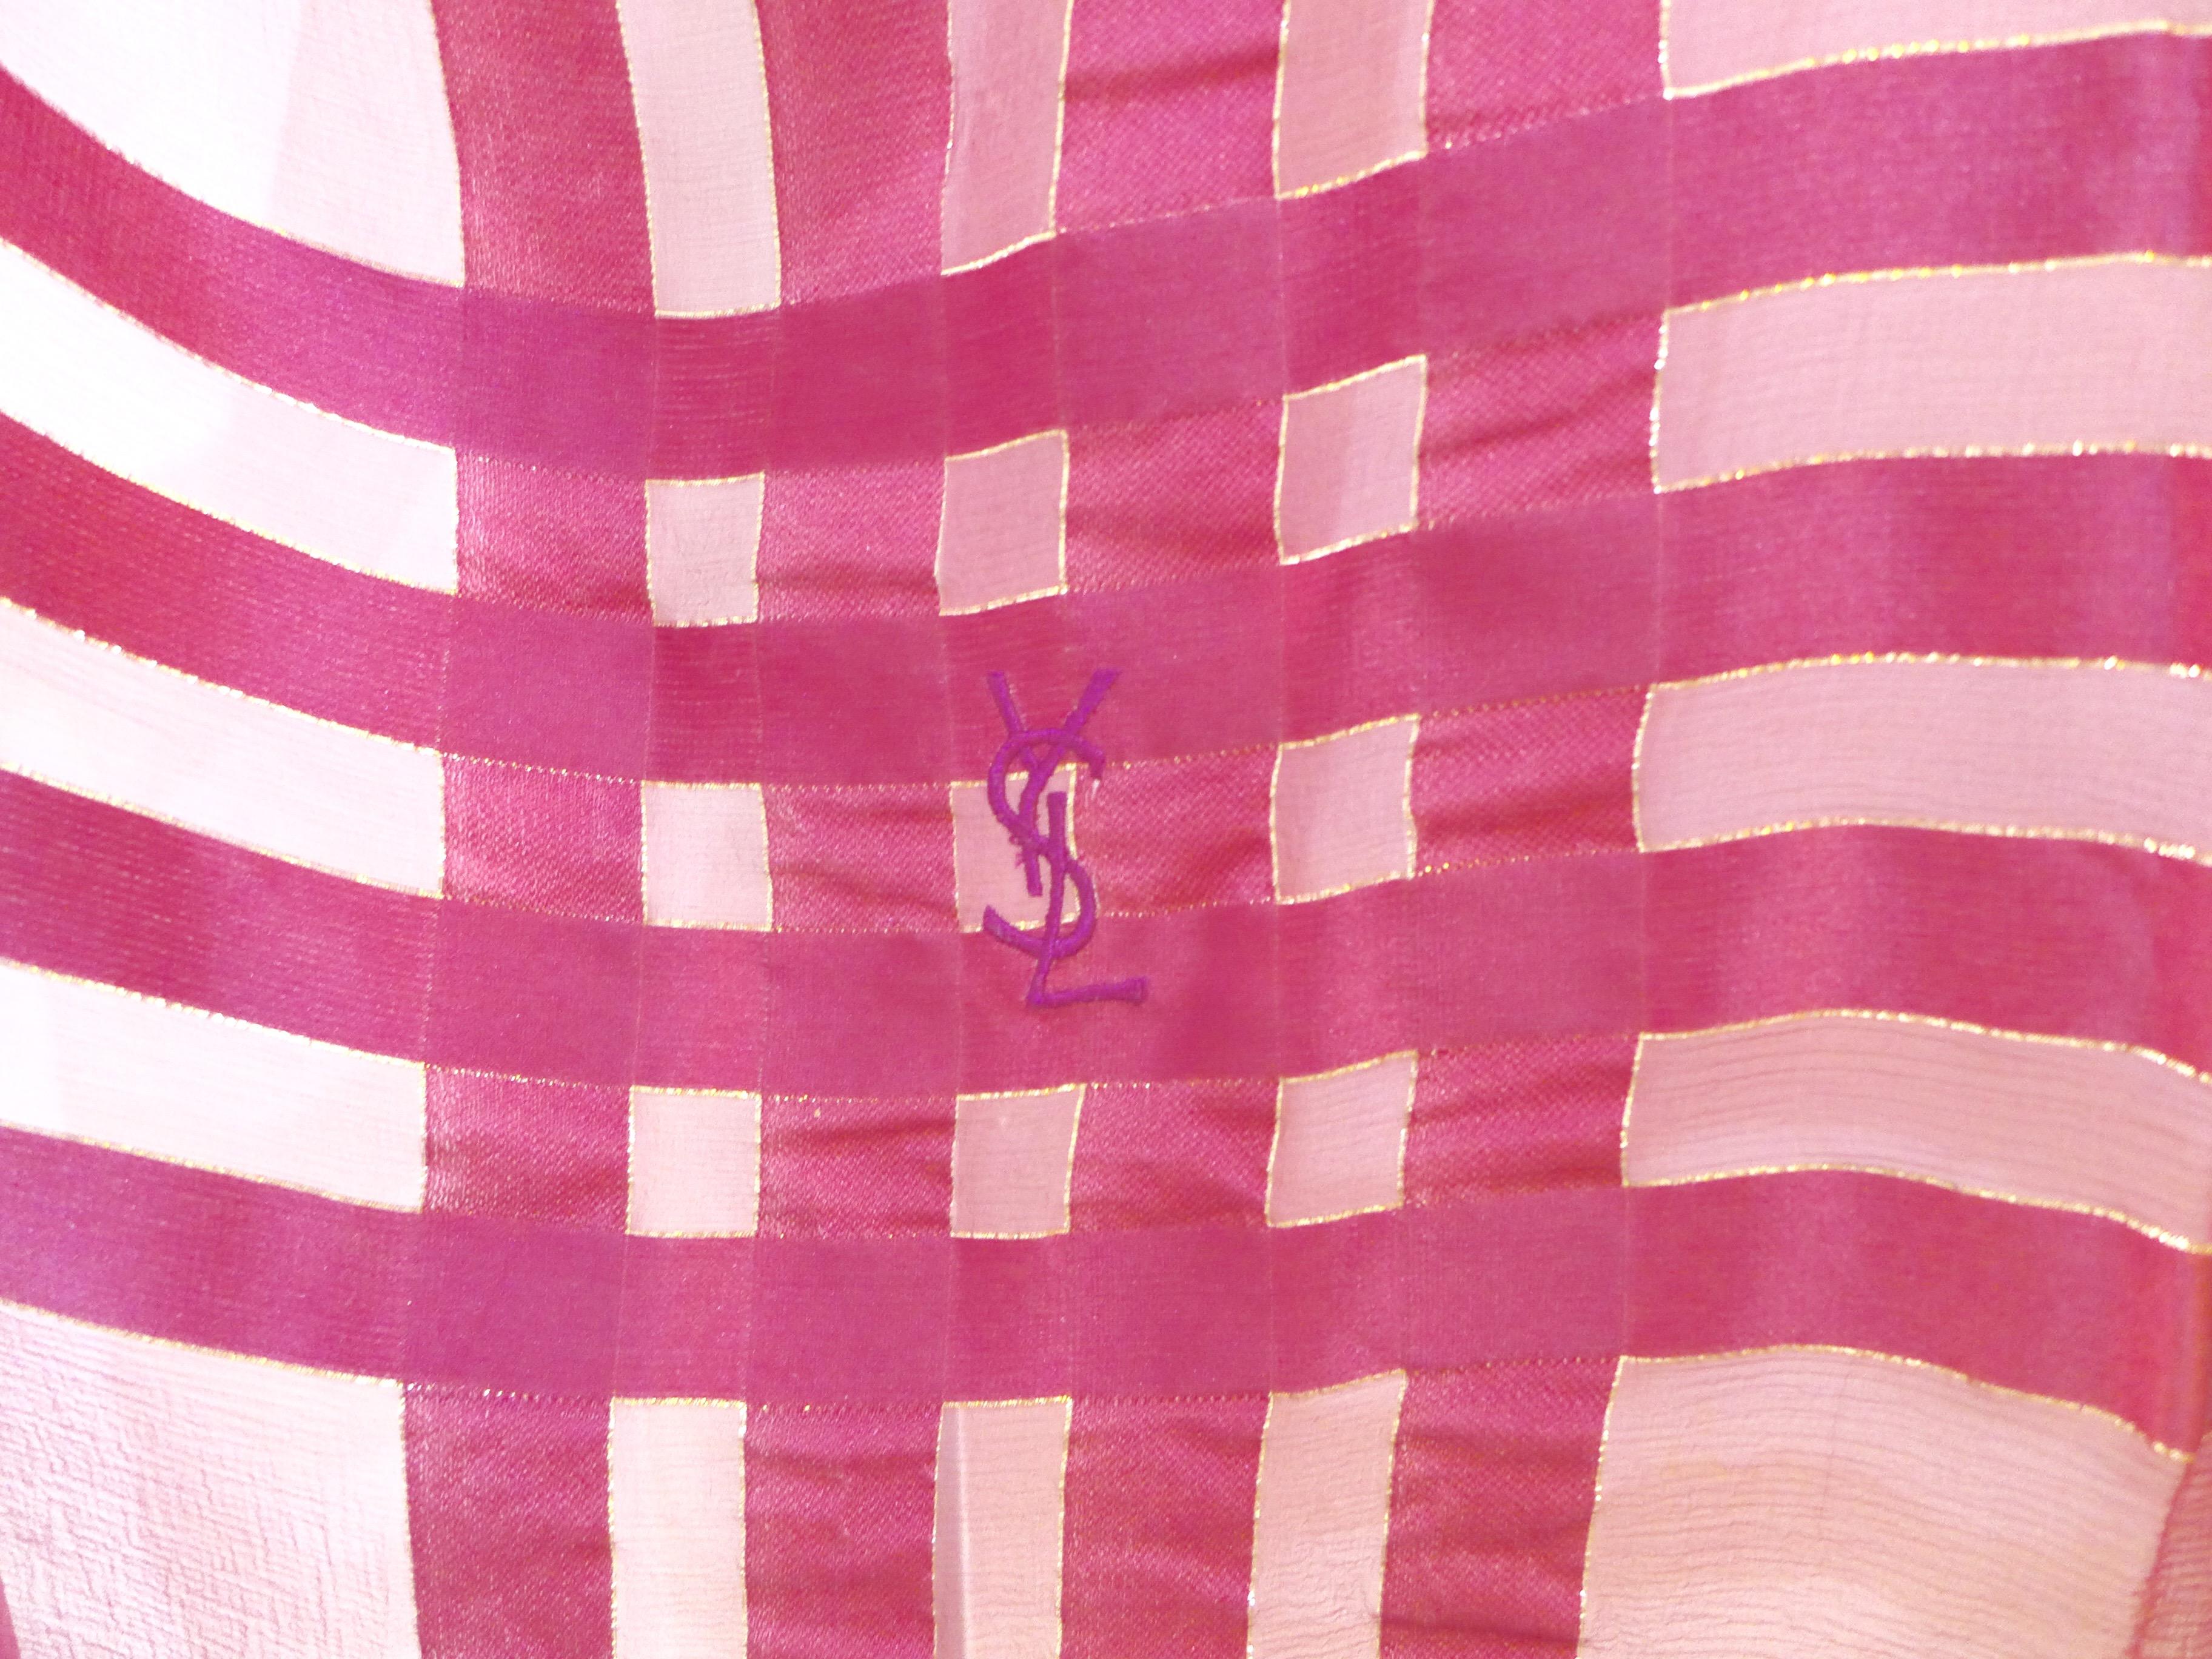 Made in France of pure silk and finished by hand with finely rolled hand-stitched edges, this eye-catching YSL scarf is 48